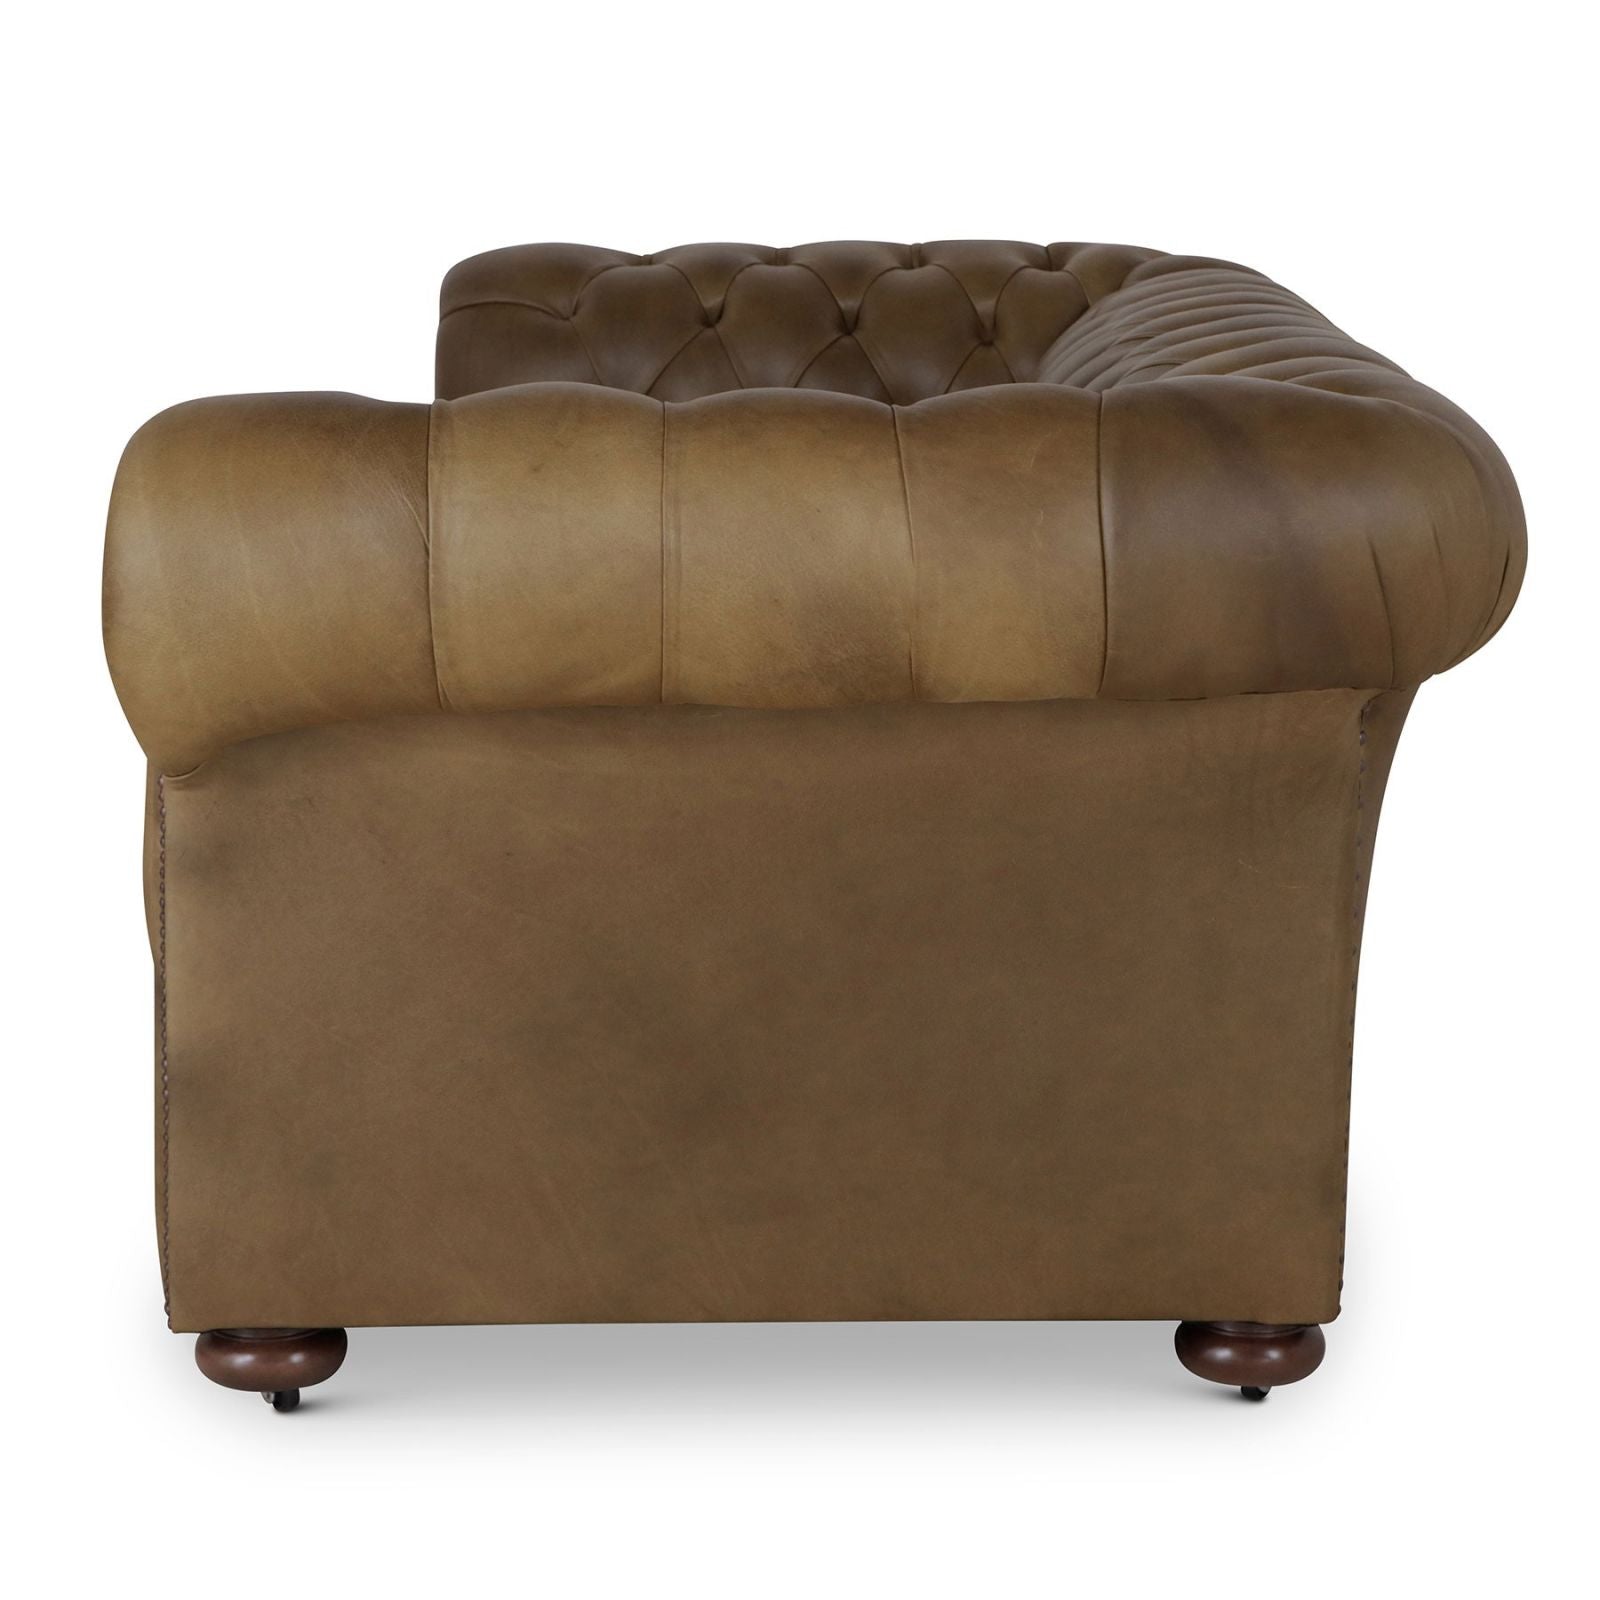 Stanhope 3 seat Chesterfield in olive green leather